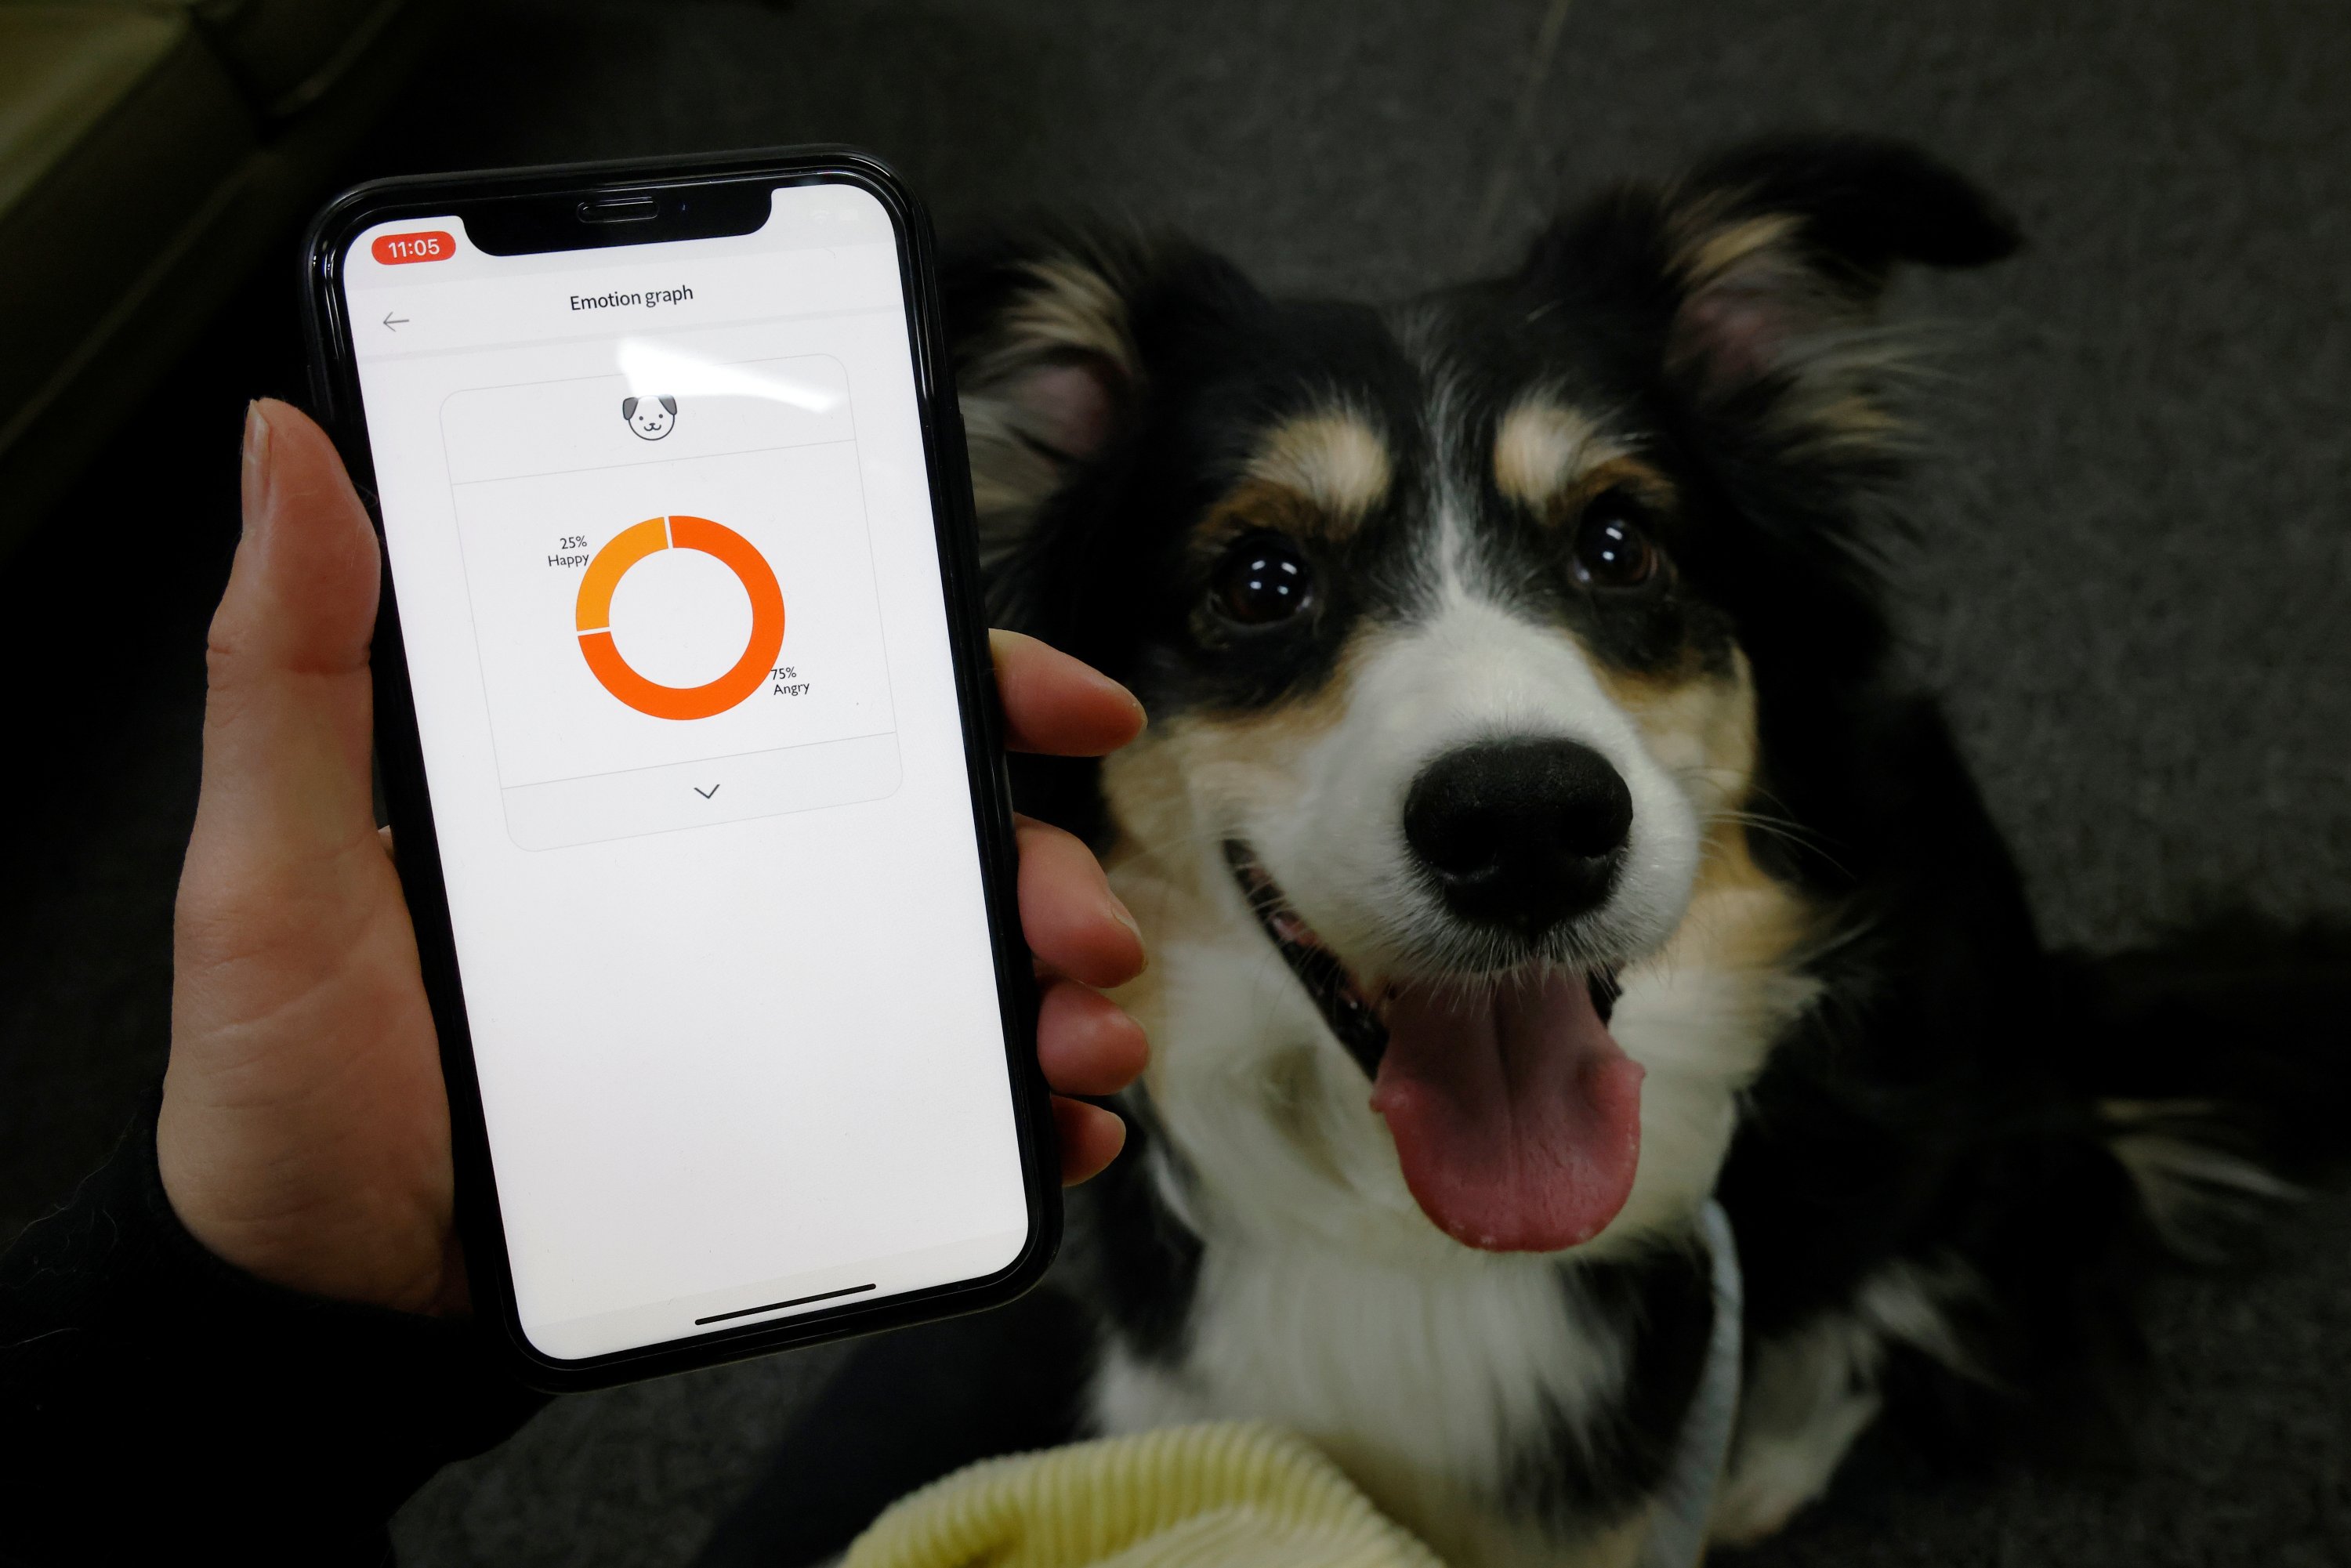 Moon Sae-mi tries out Petpuls, an AI-powered smart dog collar, with her dog Godot during a demonstration in Seoul, South Korea, Jan. 11, 2021. (Reuters Photo)